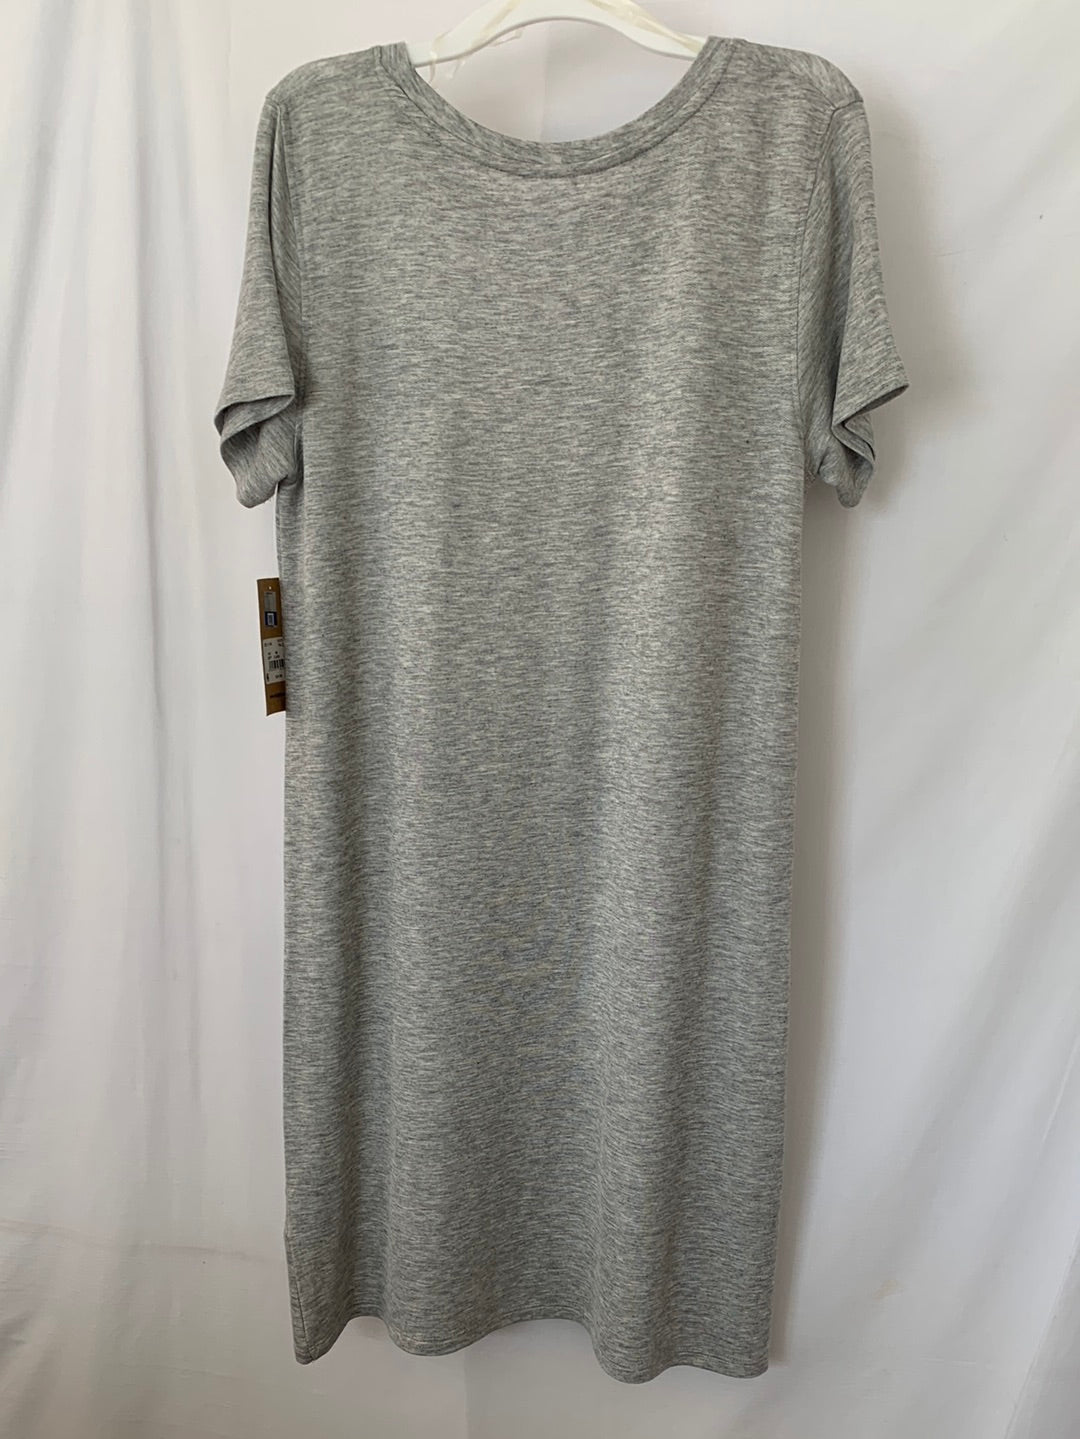 NWT - RIVALRY THREADS grey UNC Short Sleeve Nightgown Nightshirt Pajamas  - Size S (4/6)